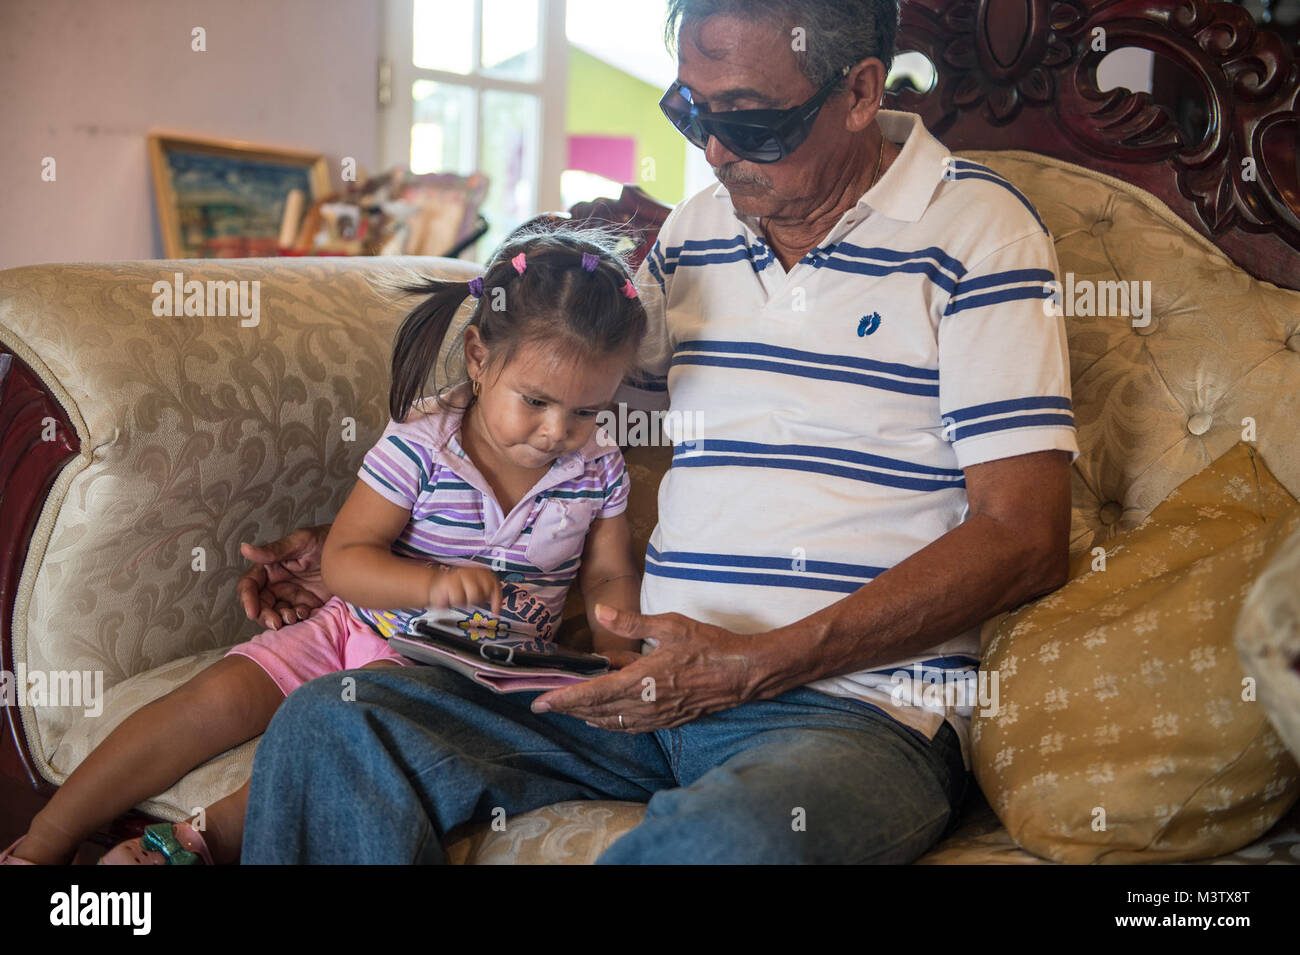 Eduardo Barrera looks at a tablet with his grandchild, Feb. 7, 2017, after having an extracapsular cataract extraction with intraocular implant surgery the day before at the Centro Hospitalario Luis 'Chicho' Fabrega during a medical readiness training exercise in Santiago, Panama. A U.S. military medical team was in Panama to help treat individuals with cataracts that otherwise would have gone untreated. Medical readiness training exercises provide U.S. military personnel training in delivery of medical care in austere conditions, promote diplomatic relations between the U.S. and host nations  Stock Photo